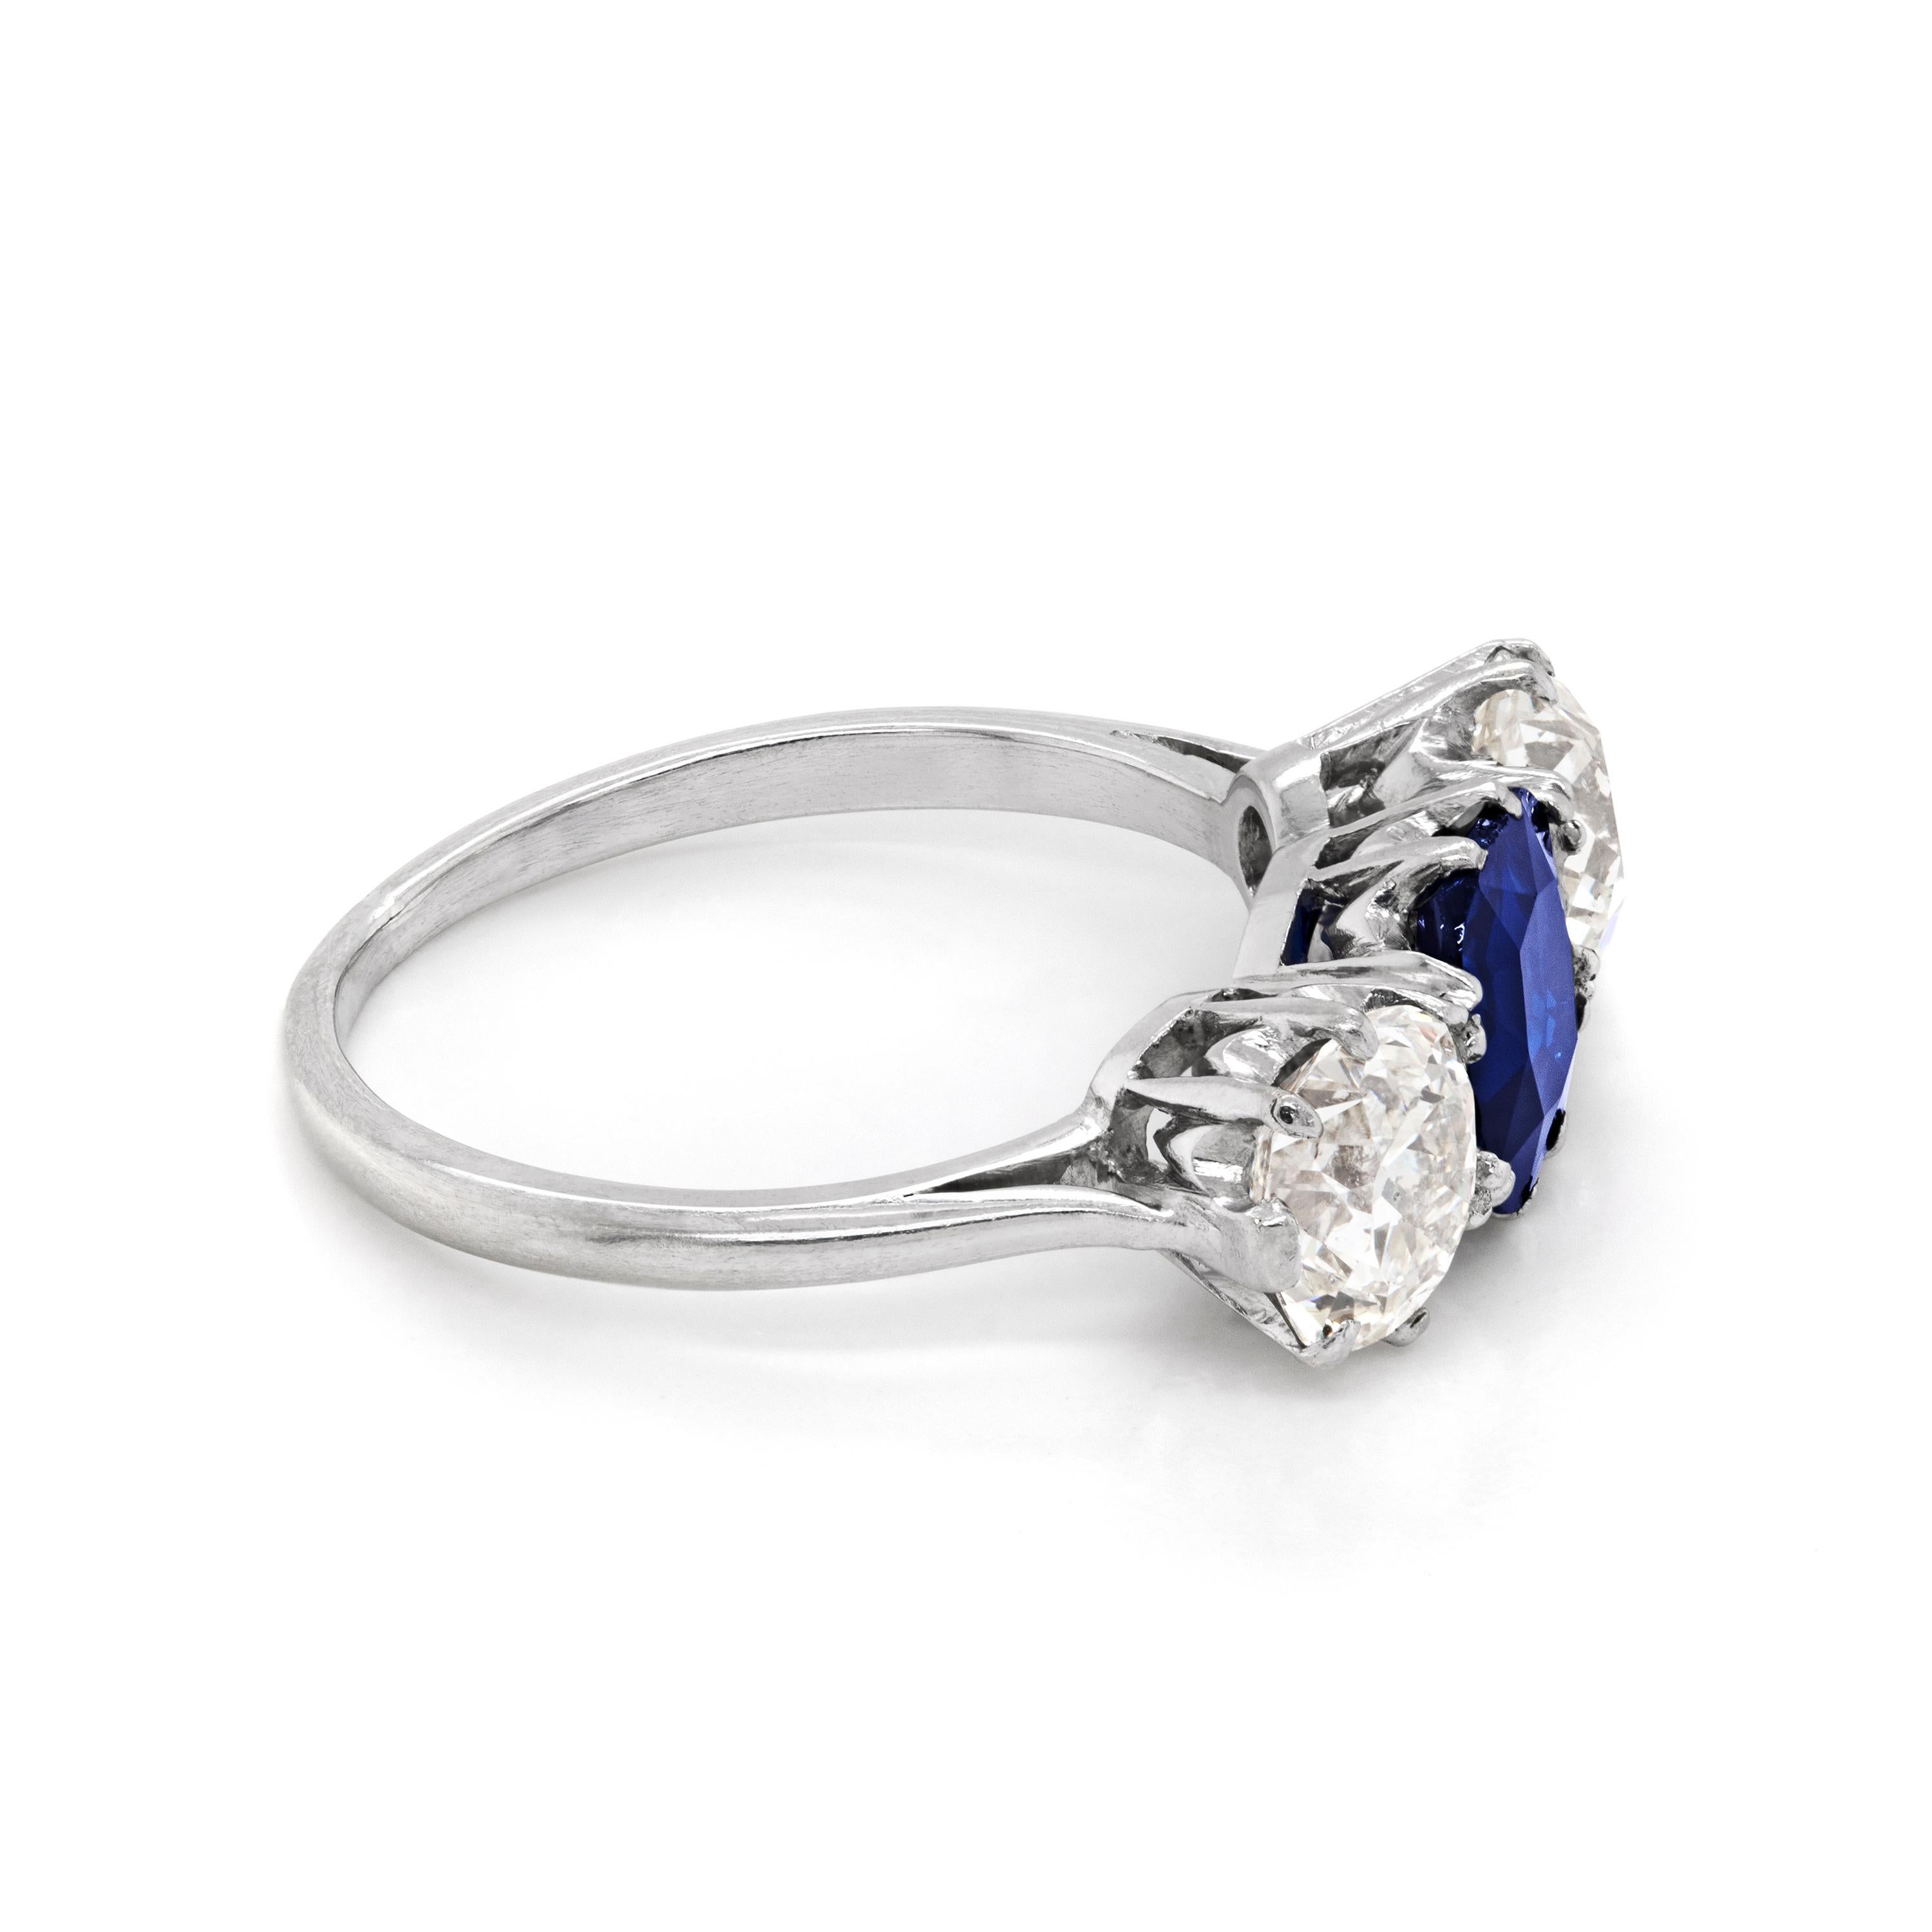 This exquisite three stone ring features a cushion shaped old cut natural unheated transparent blue sapphire mounted in an open back claw setting weighing 1.38 carats. The sapphire is beautifully accompanied by two old cut diamonds with an